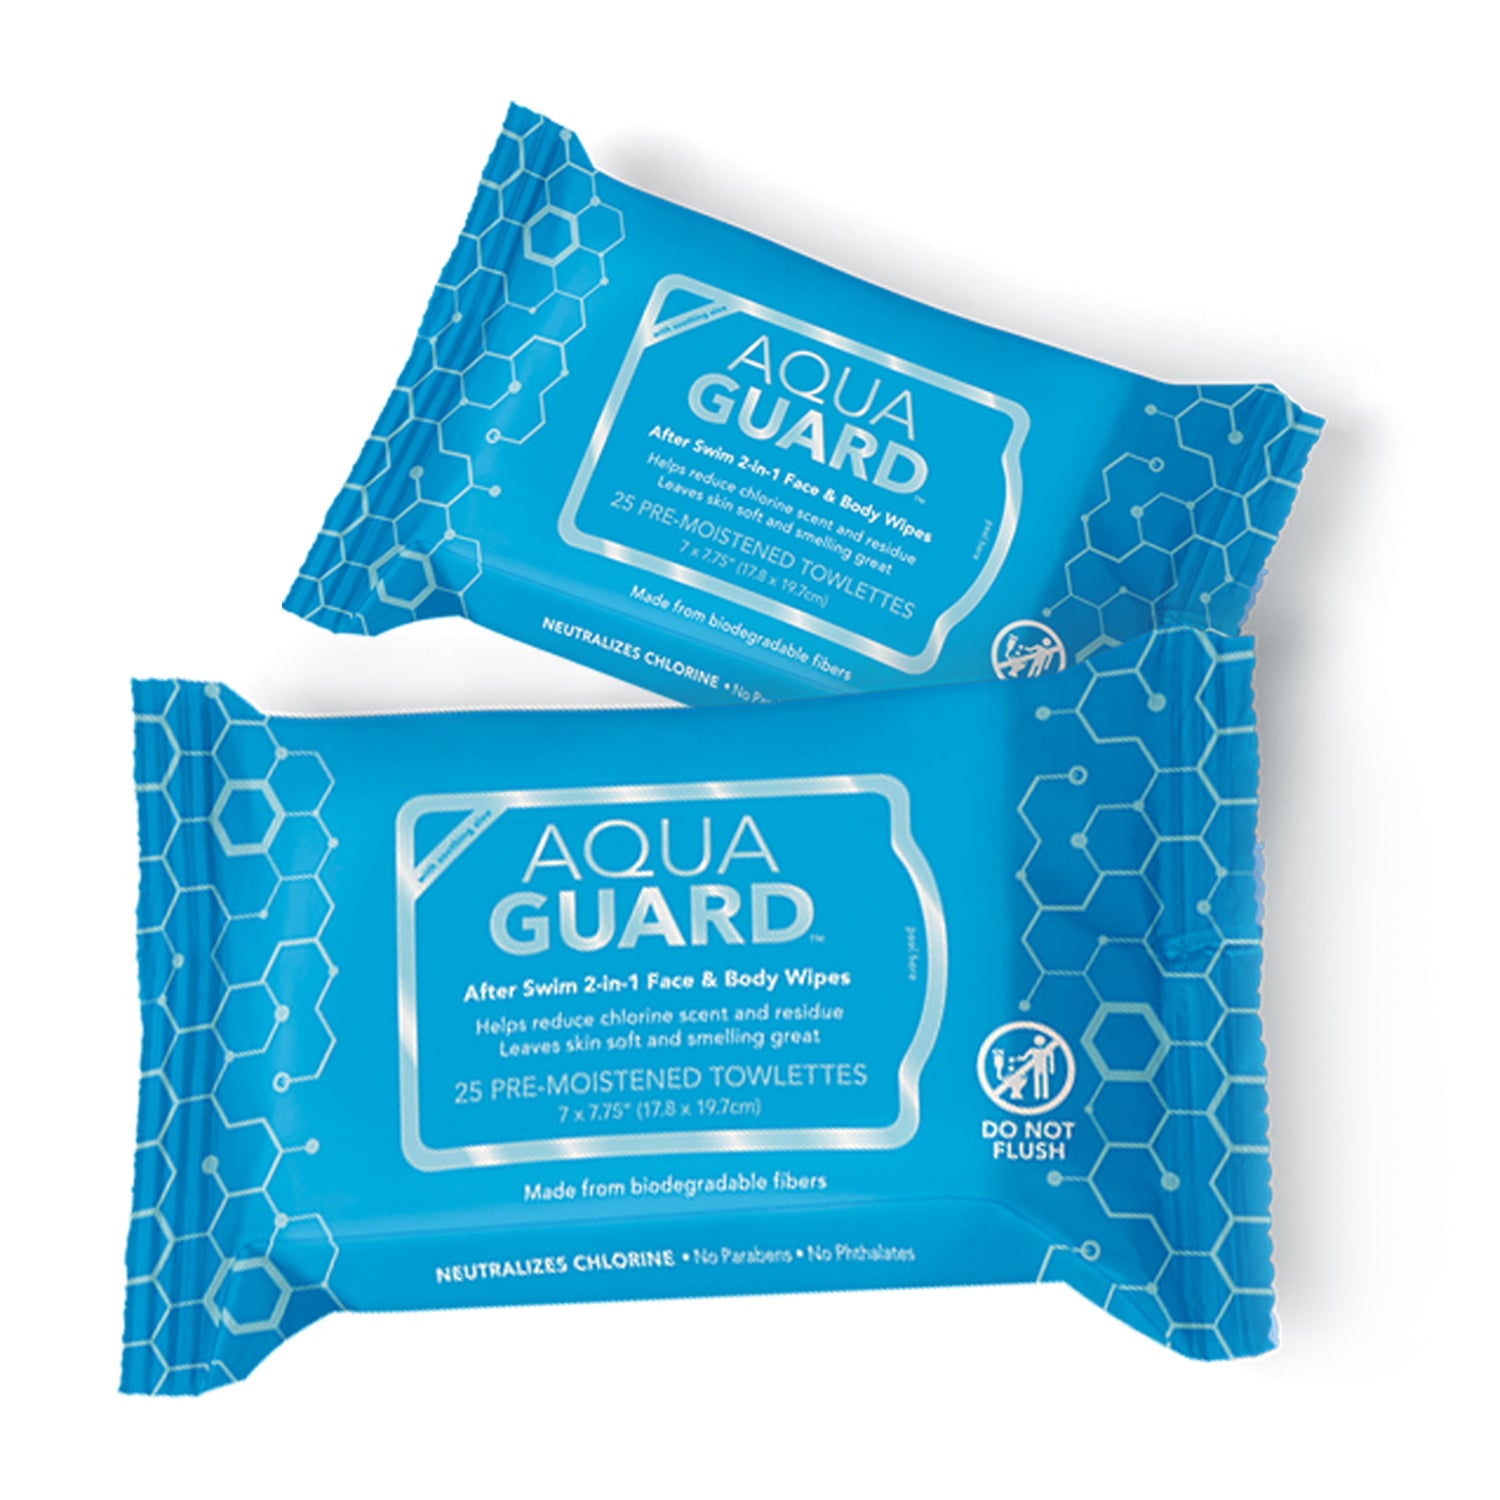 After-Swim Face & Body Wipes